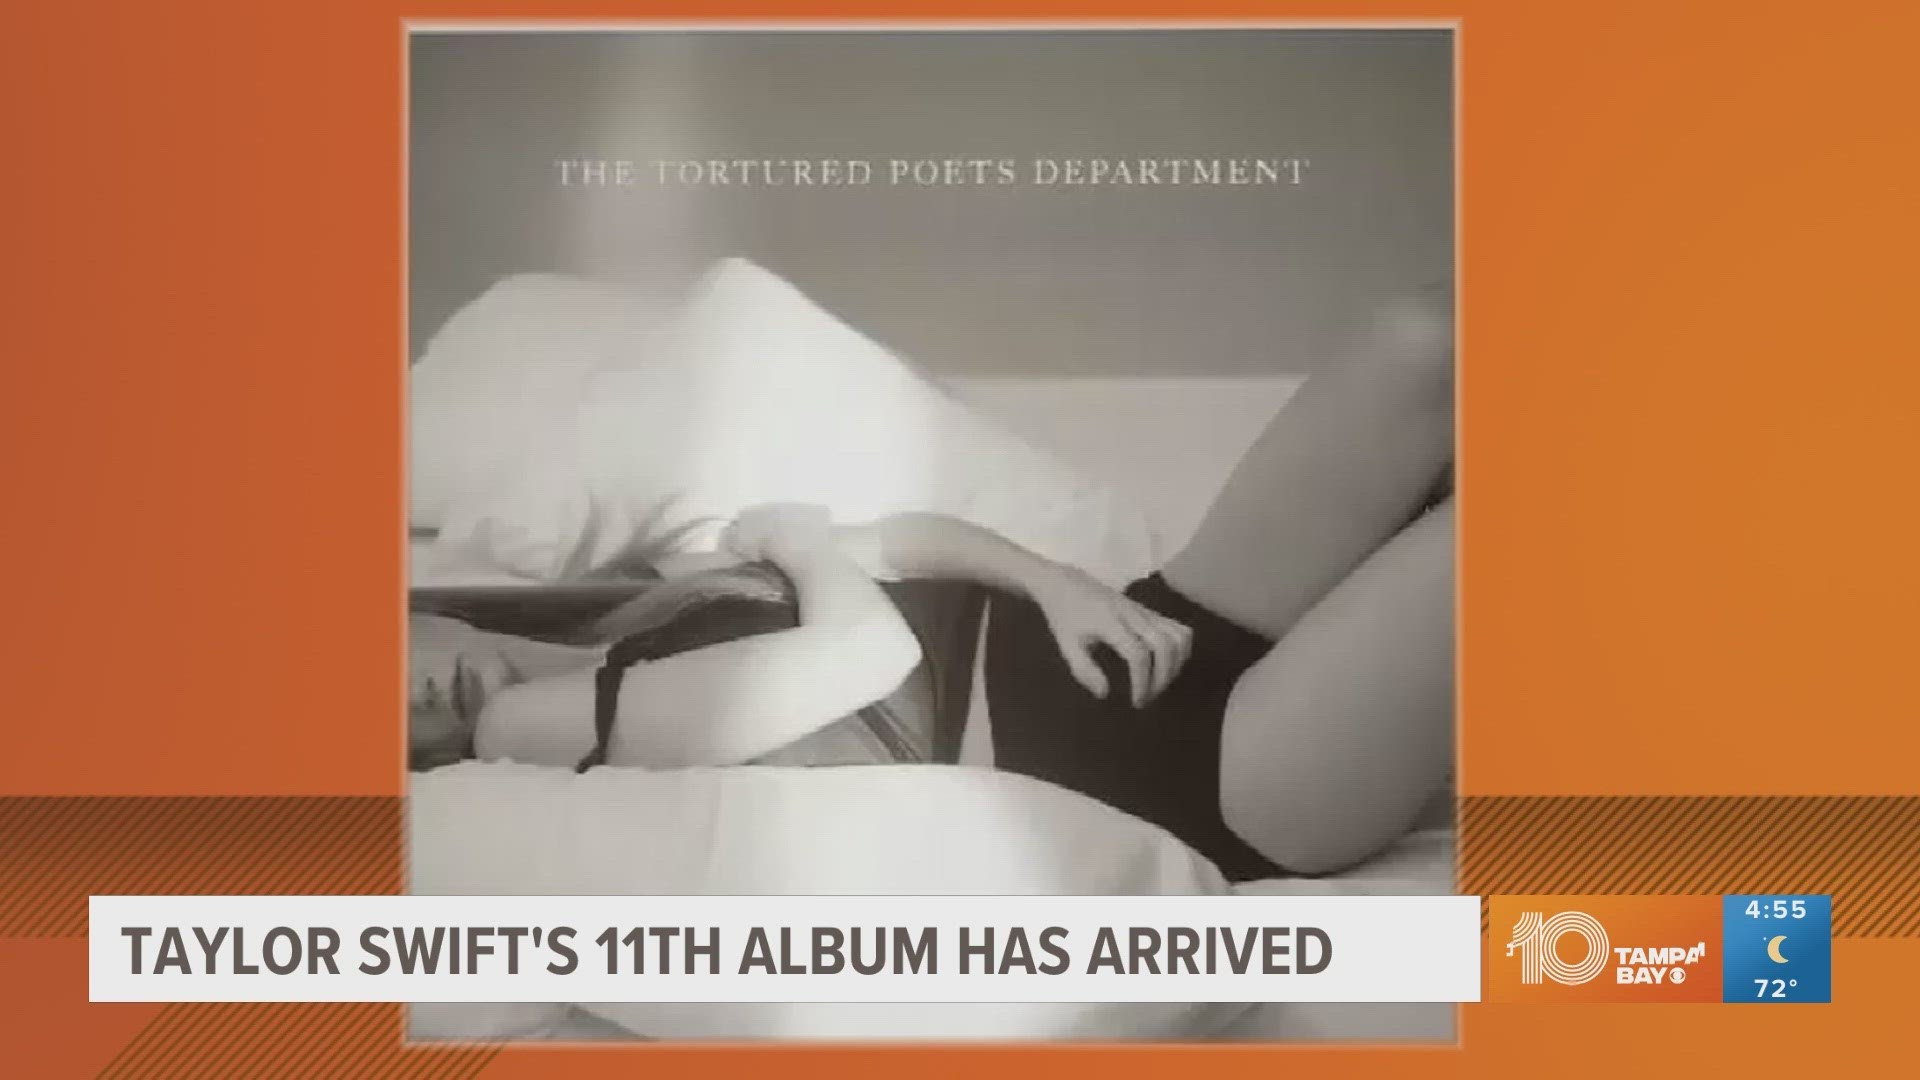 Taylor Swift's album "The Tortured Poets Department" is available now for streaming and purchase. It contains 16 songs and dropped at midnight.